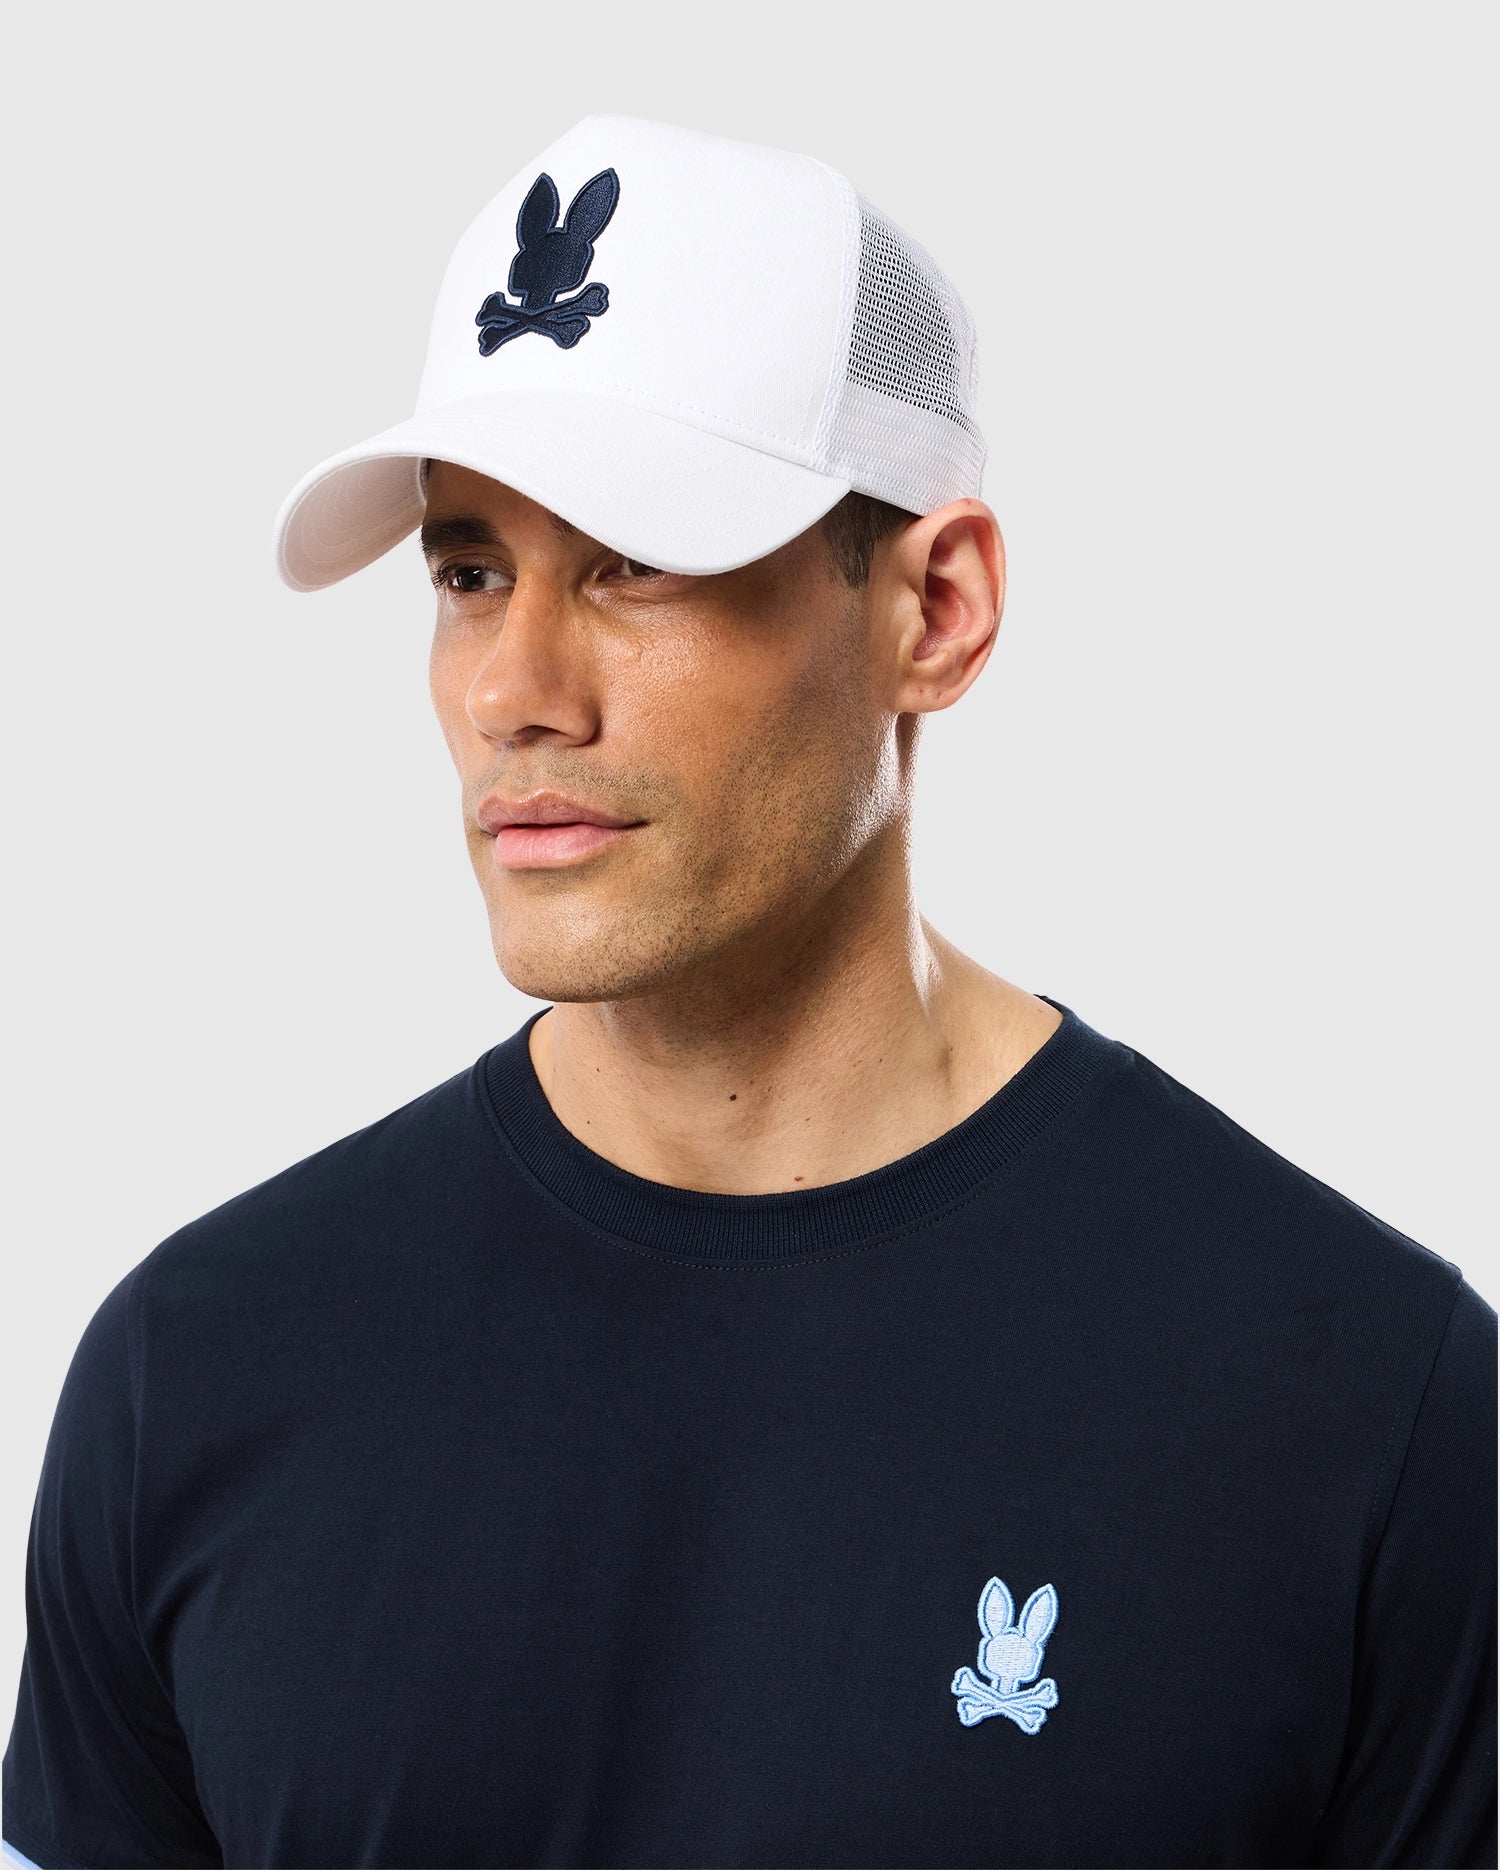 A man wearing a white and black Psycho Bunny Houston trucker cap with a rabbit emblem and embroidered eyelet vents, alongside a dark blue t-shirt adorned with a matching rabbit logo on the chest.